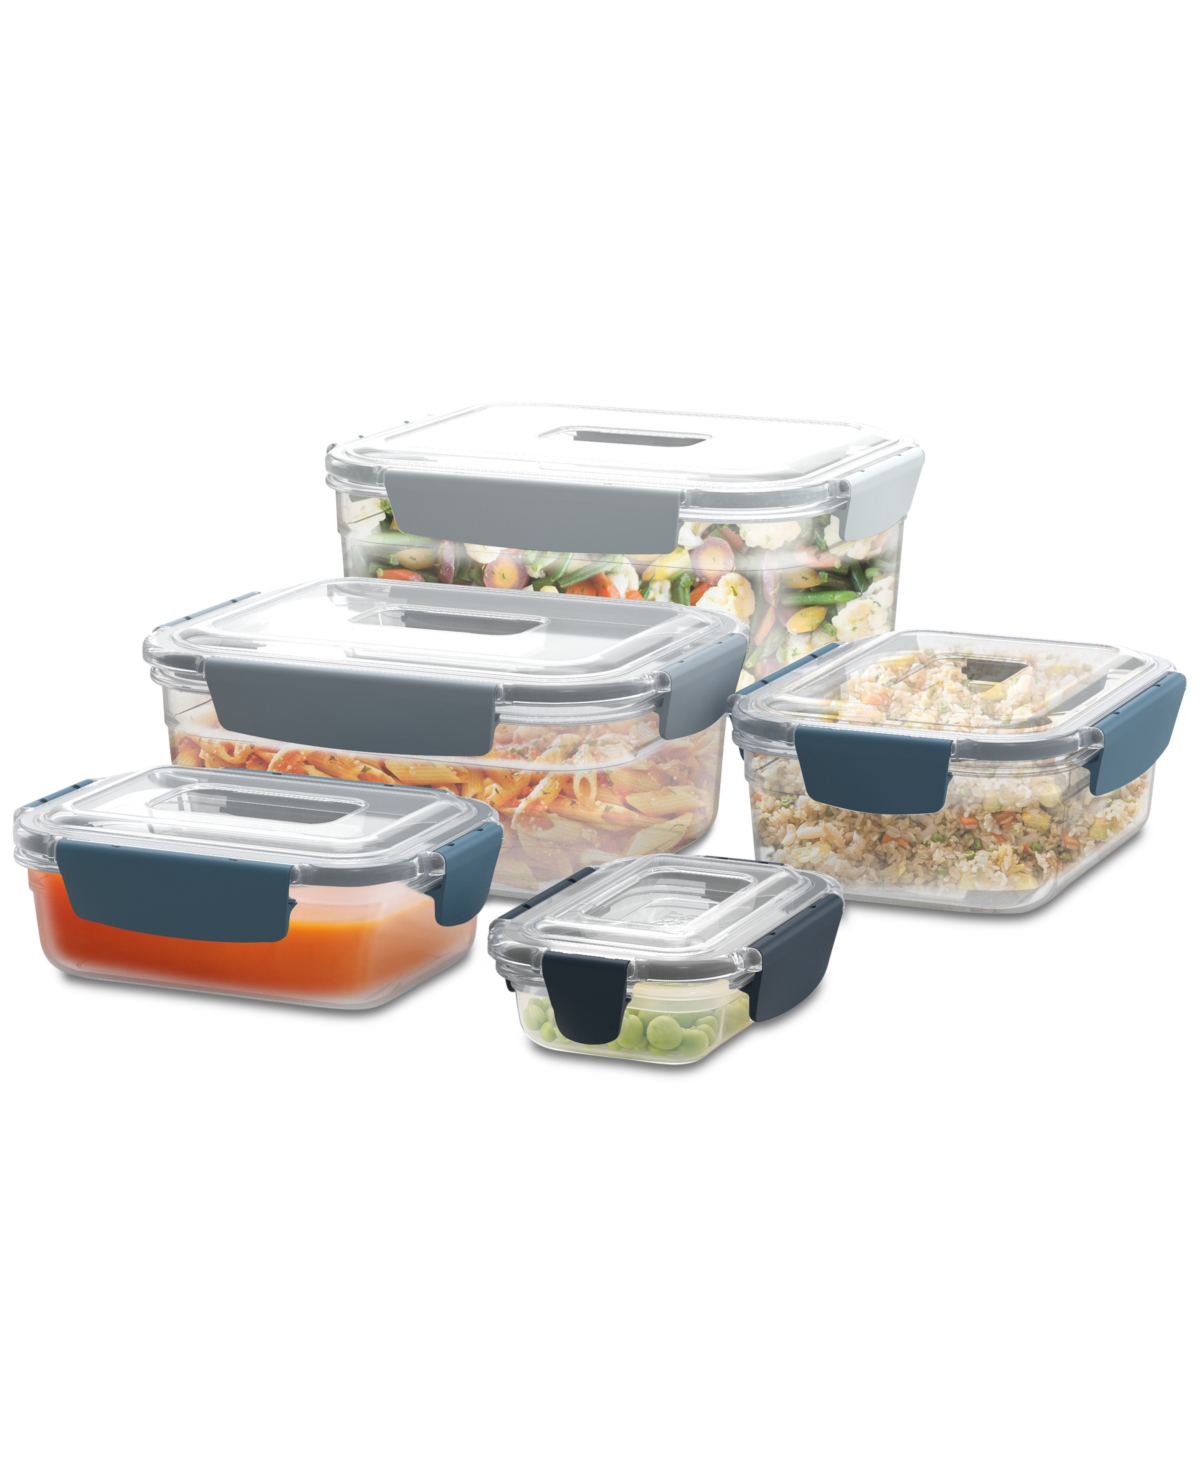 Nest Lock 10-Pc. Food Storage Container Set, Editions - Sky Blue